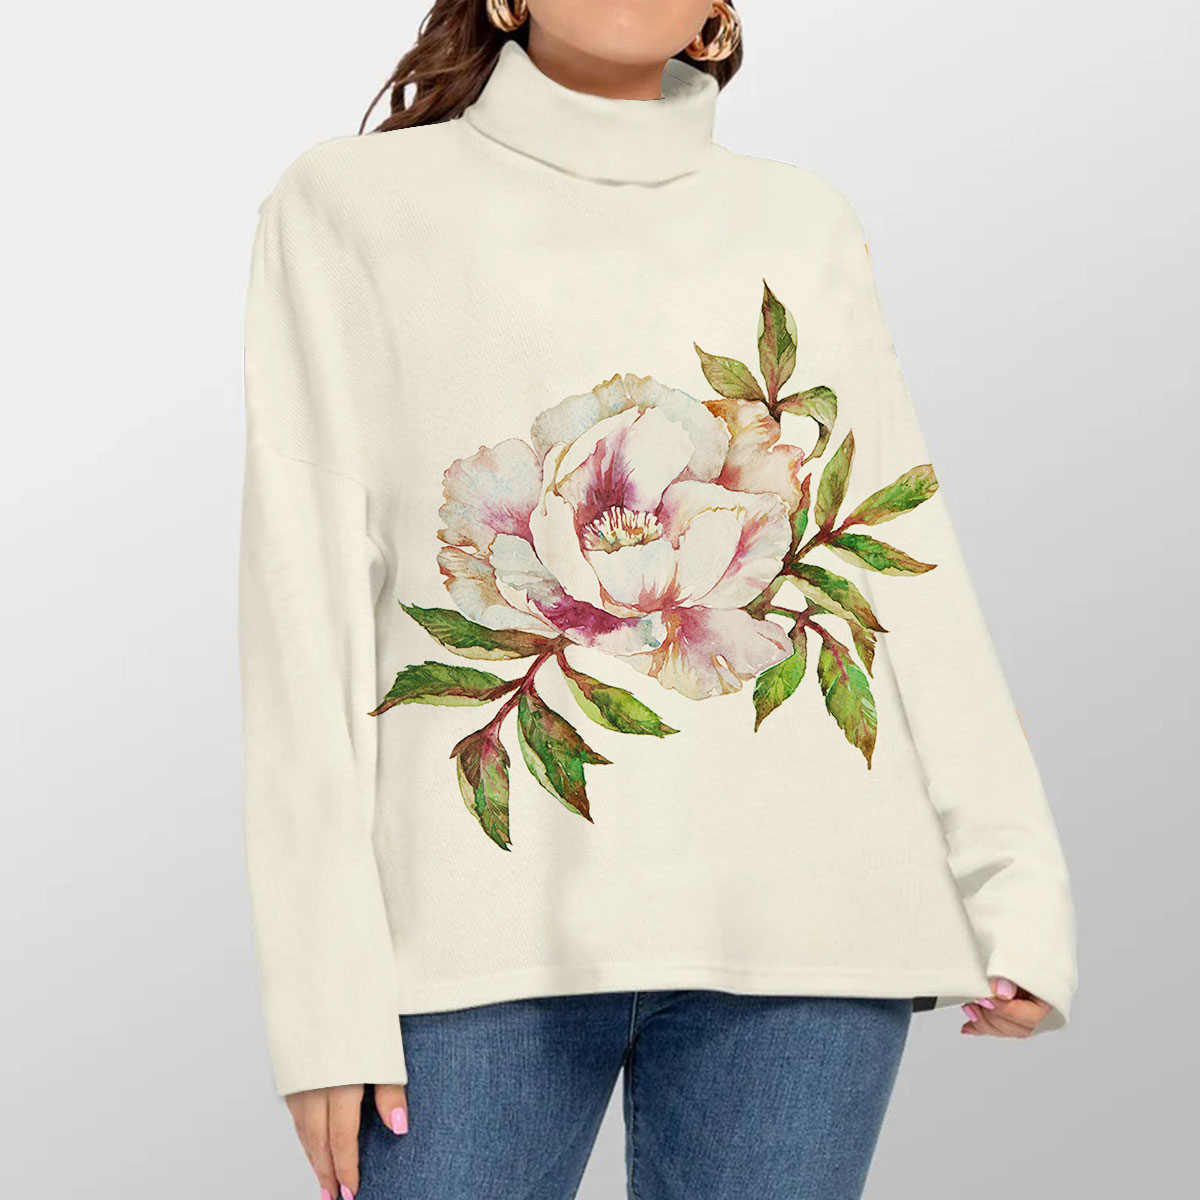 Peony Flower With Leaves Turtleneck Sweater